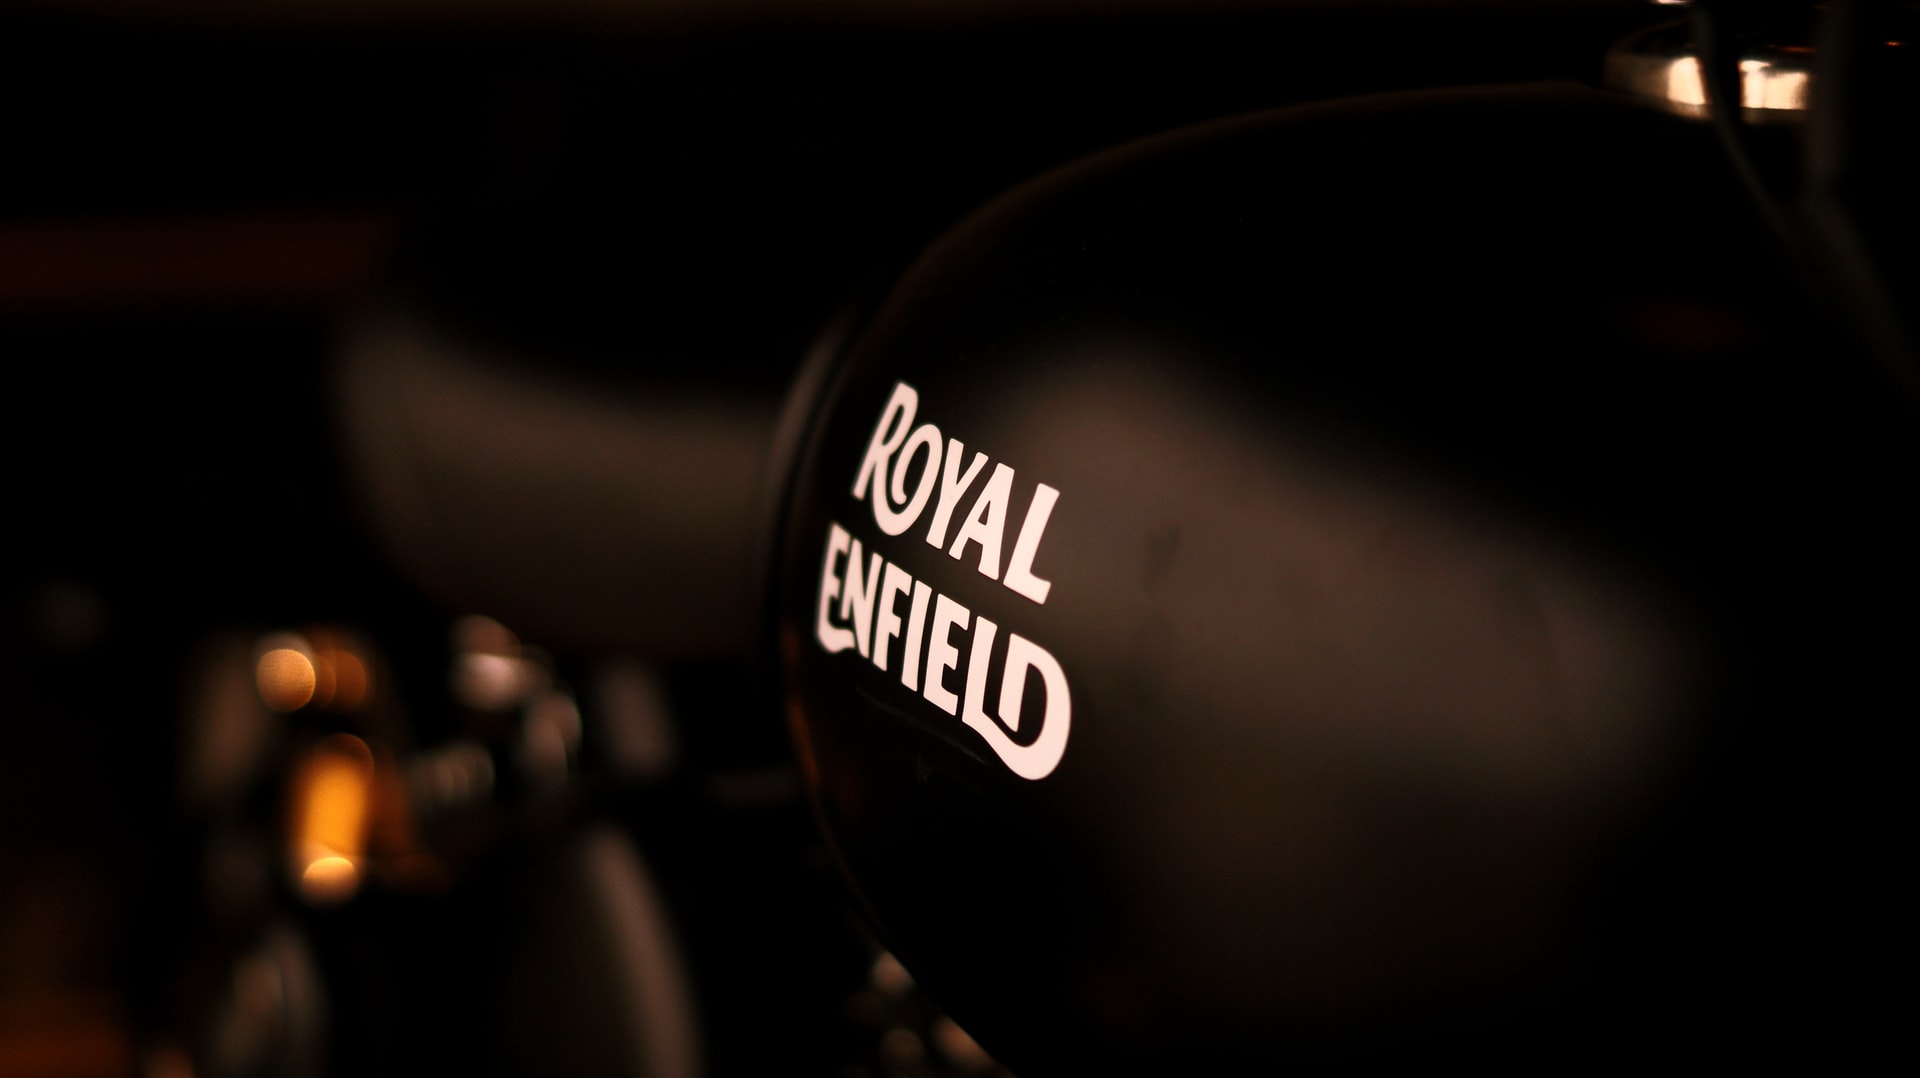 The Royal Enfield Story
